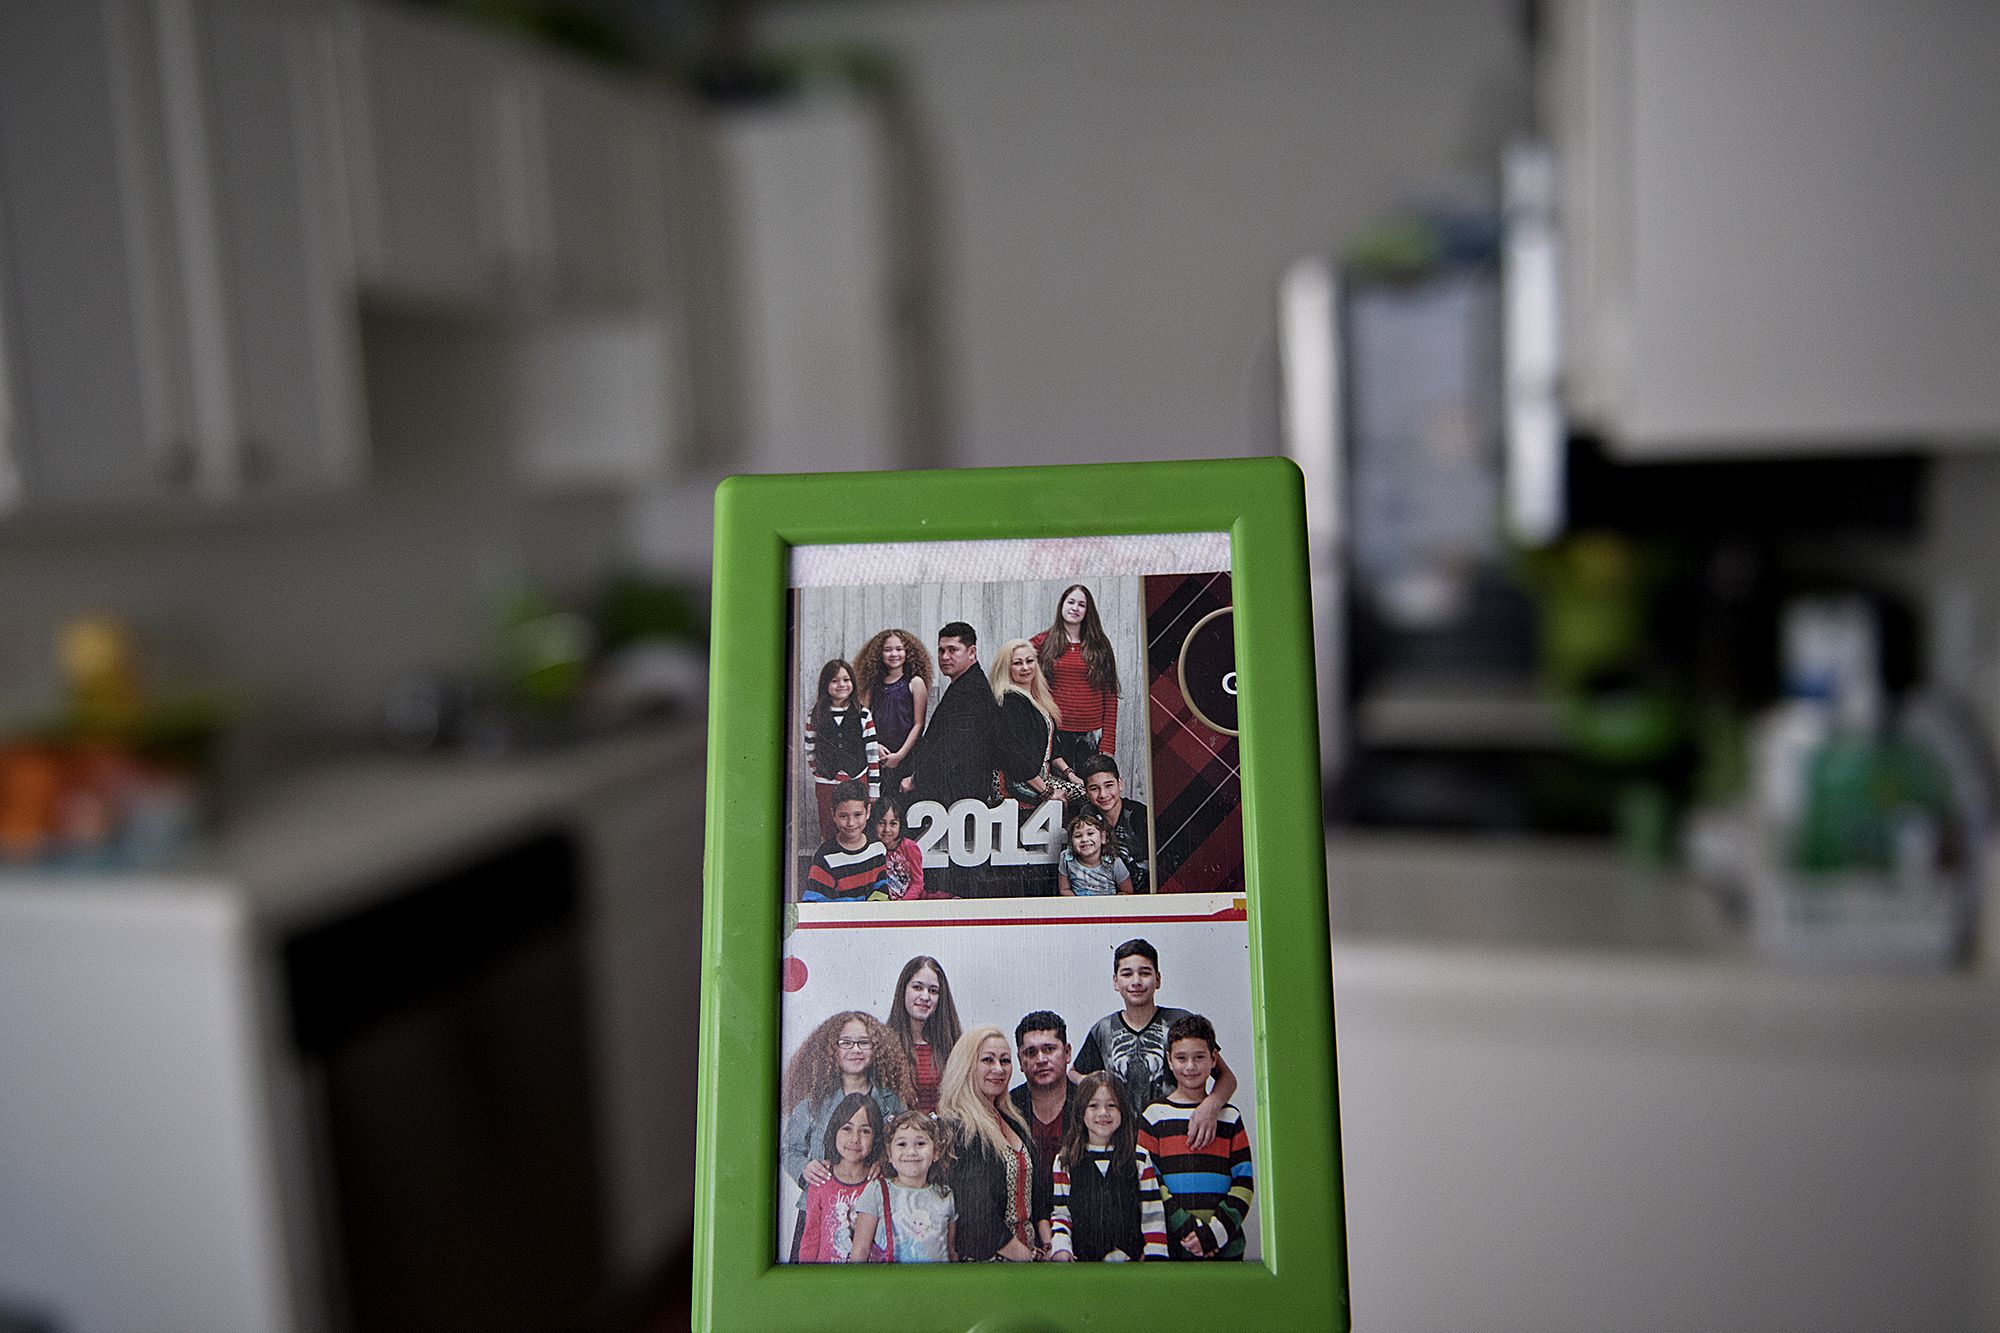 Photos of the Flores family from the past are seen in their Chula Vista kitchen. Image by Amanda Cowan. United States, 2019.